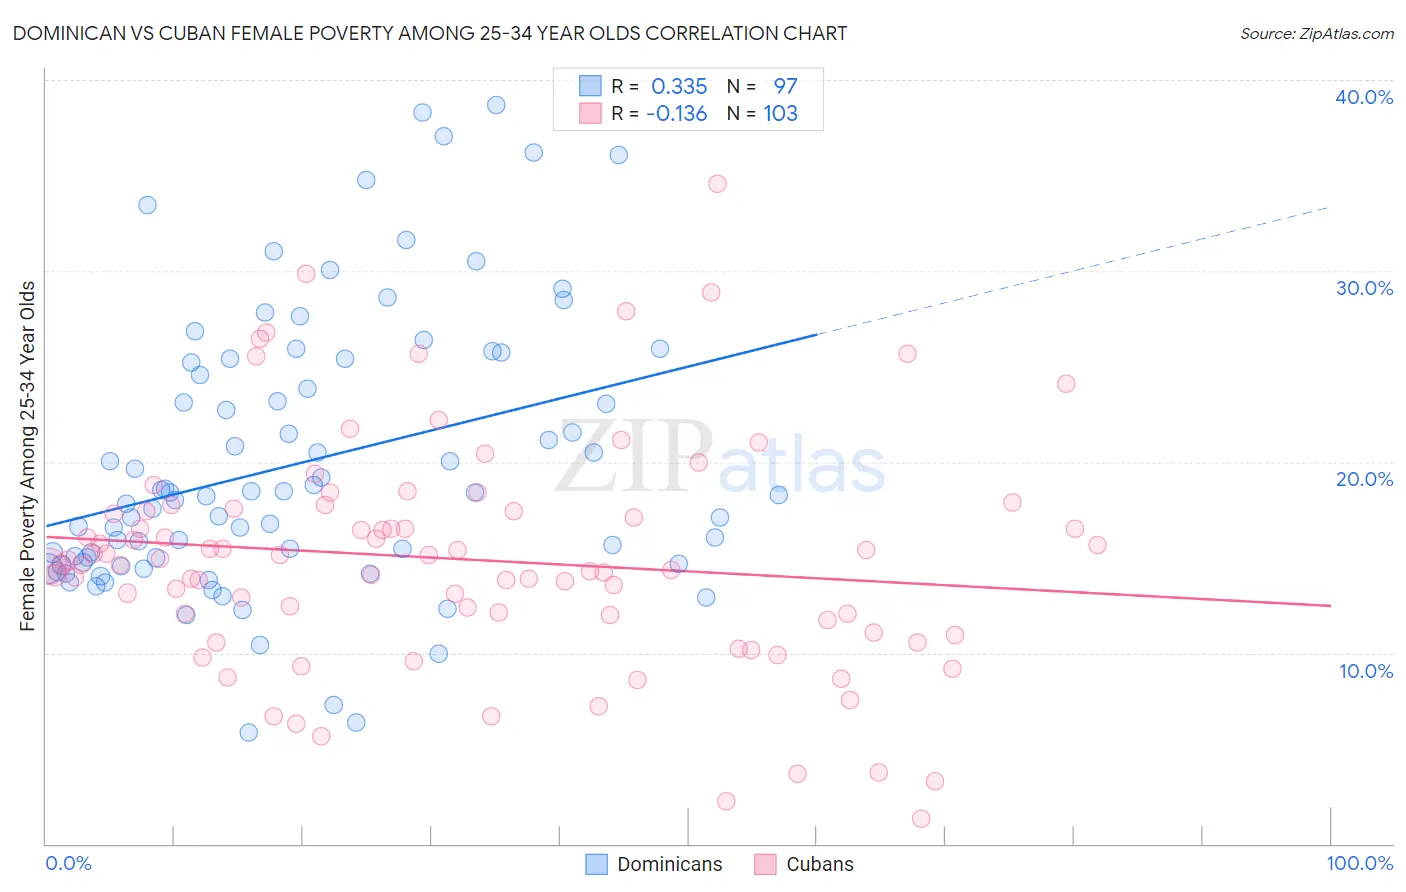 Dominican vs Cuban Female Poverty Among 25-34 Year Olds